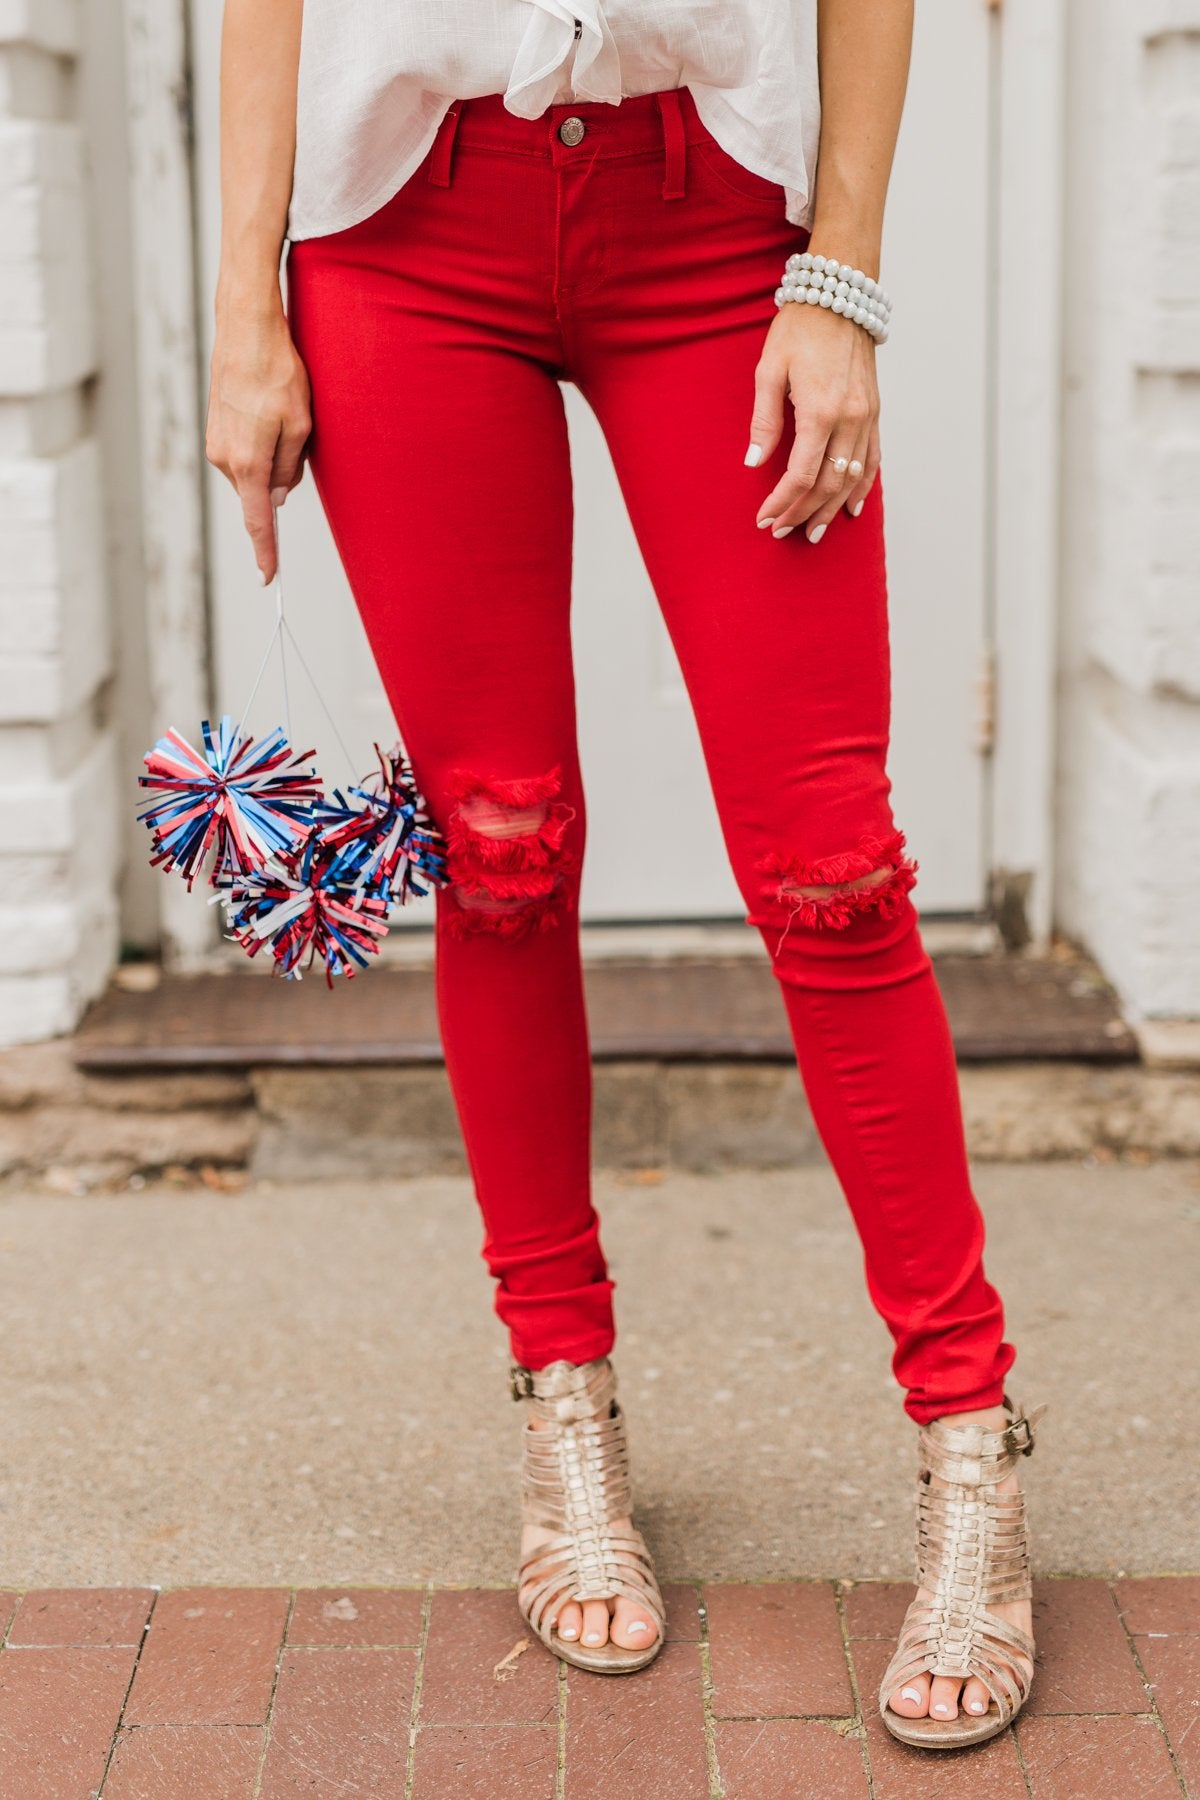 Red Skinny Jeans